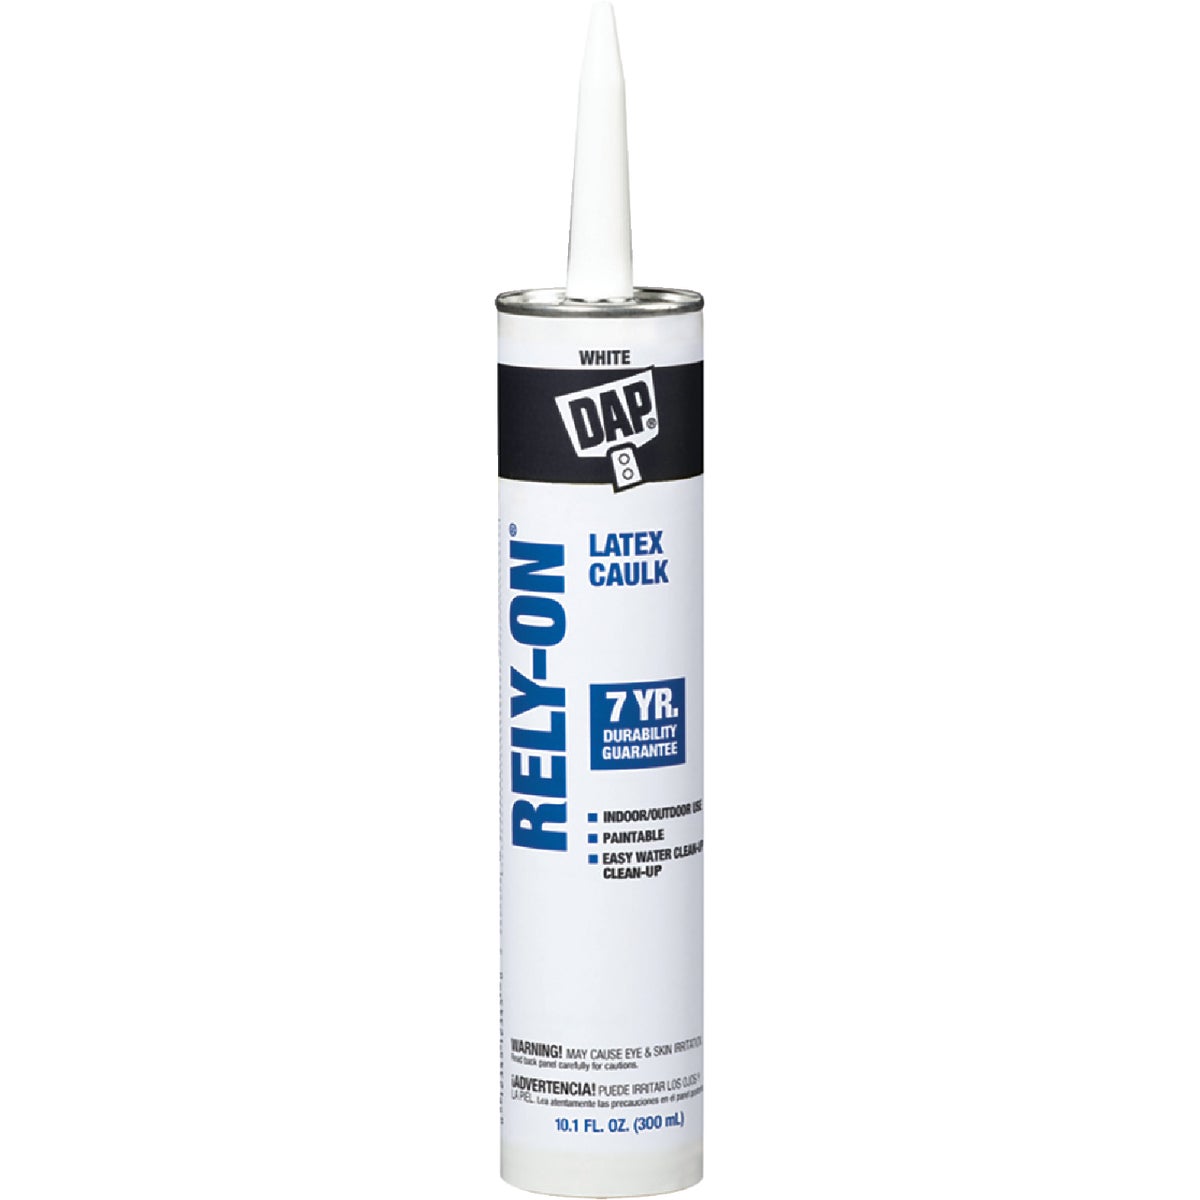 Item 776967, DAP RELY-ON Latex Caulk is a general purpose caulking compound for indoor/